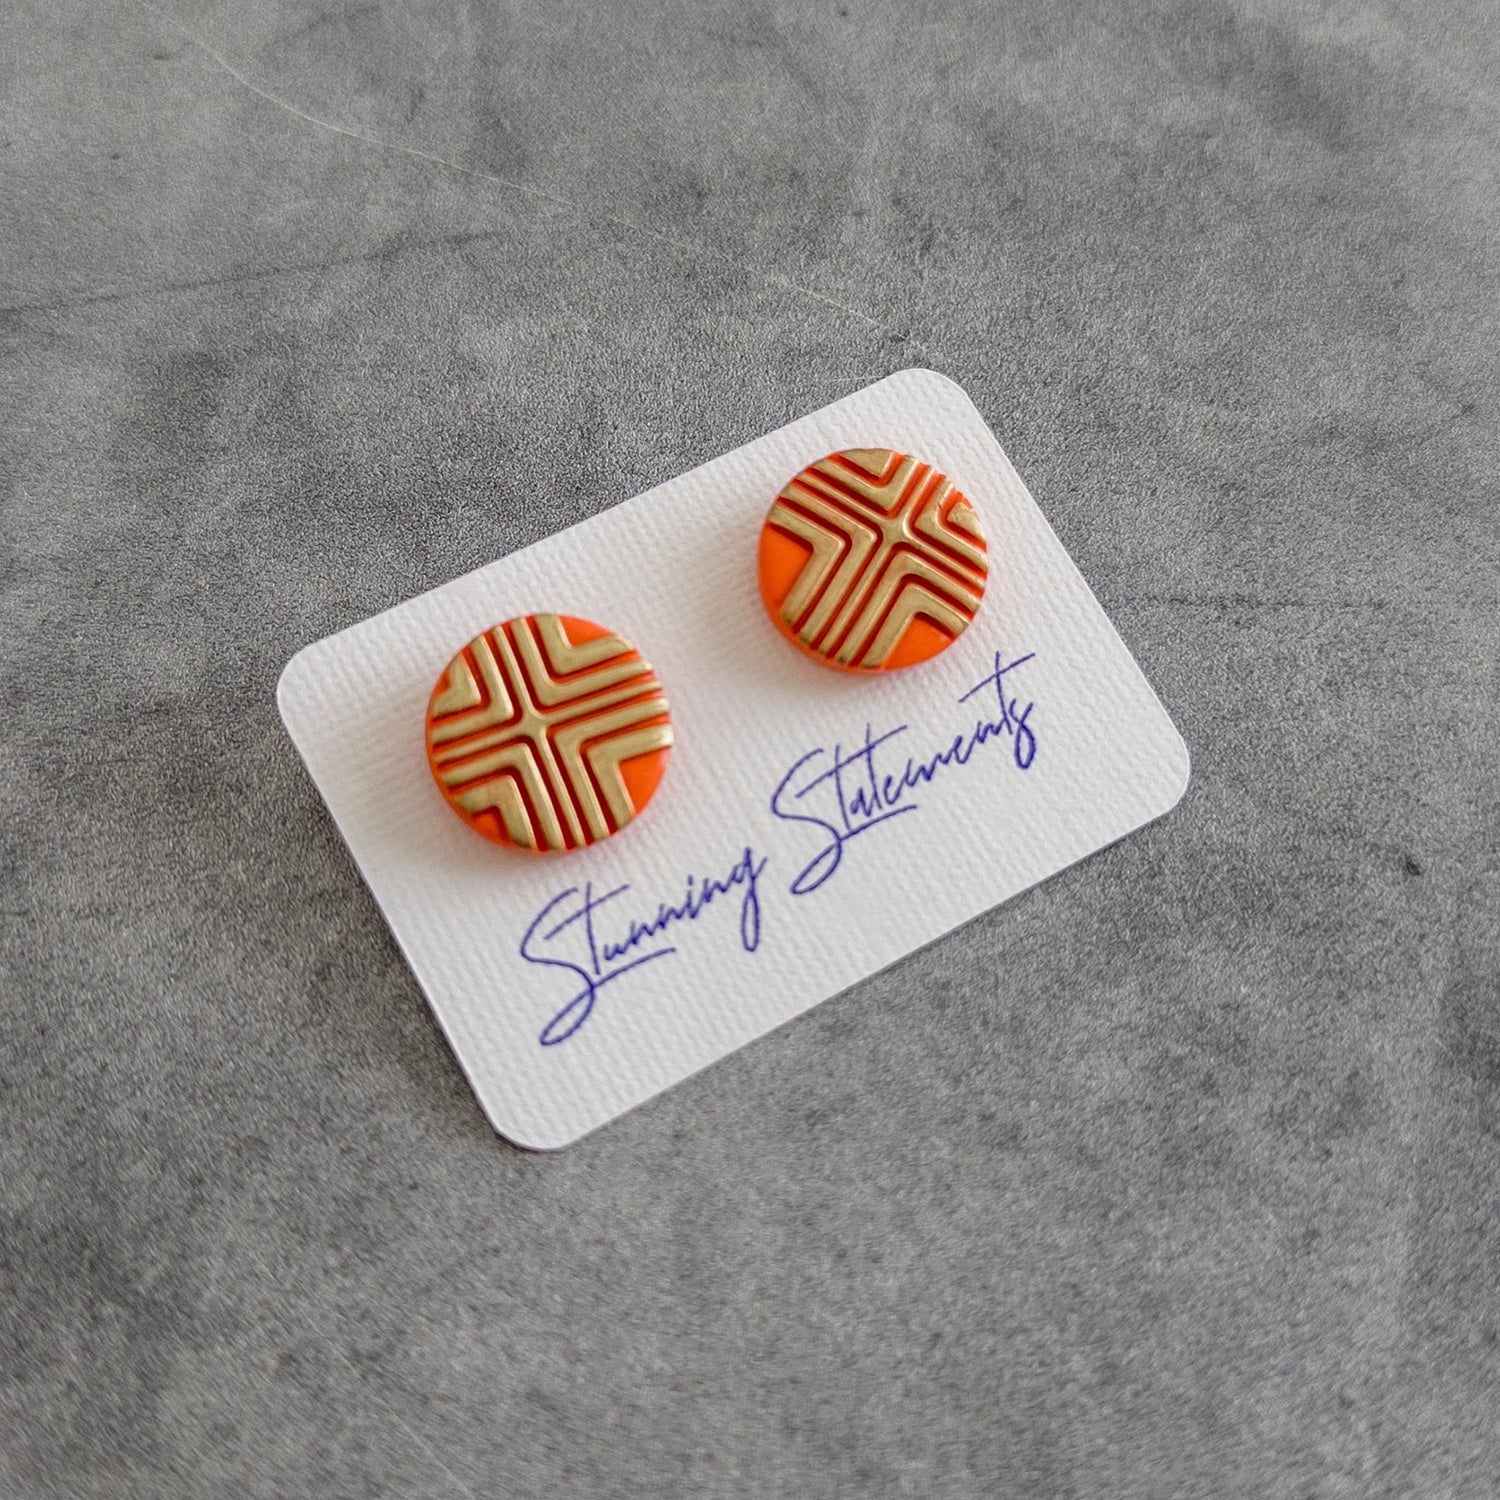 stunning statements textured bright bold colorful orange cleo stud earrings